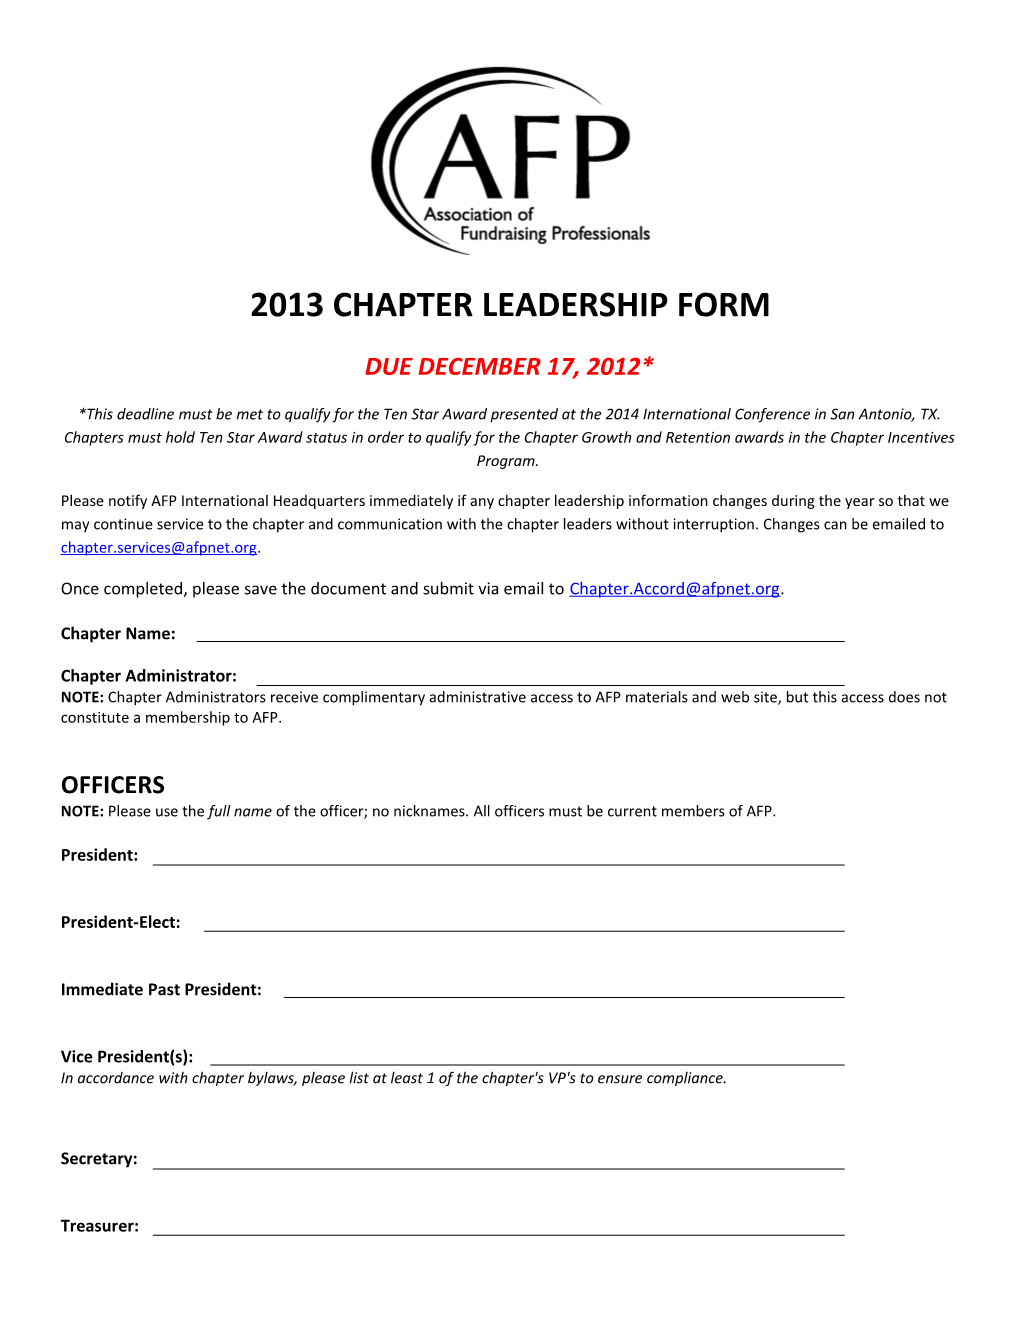 2013 Chapter Leadership Form